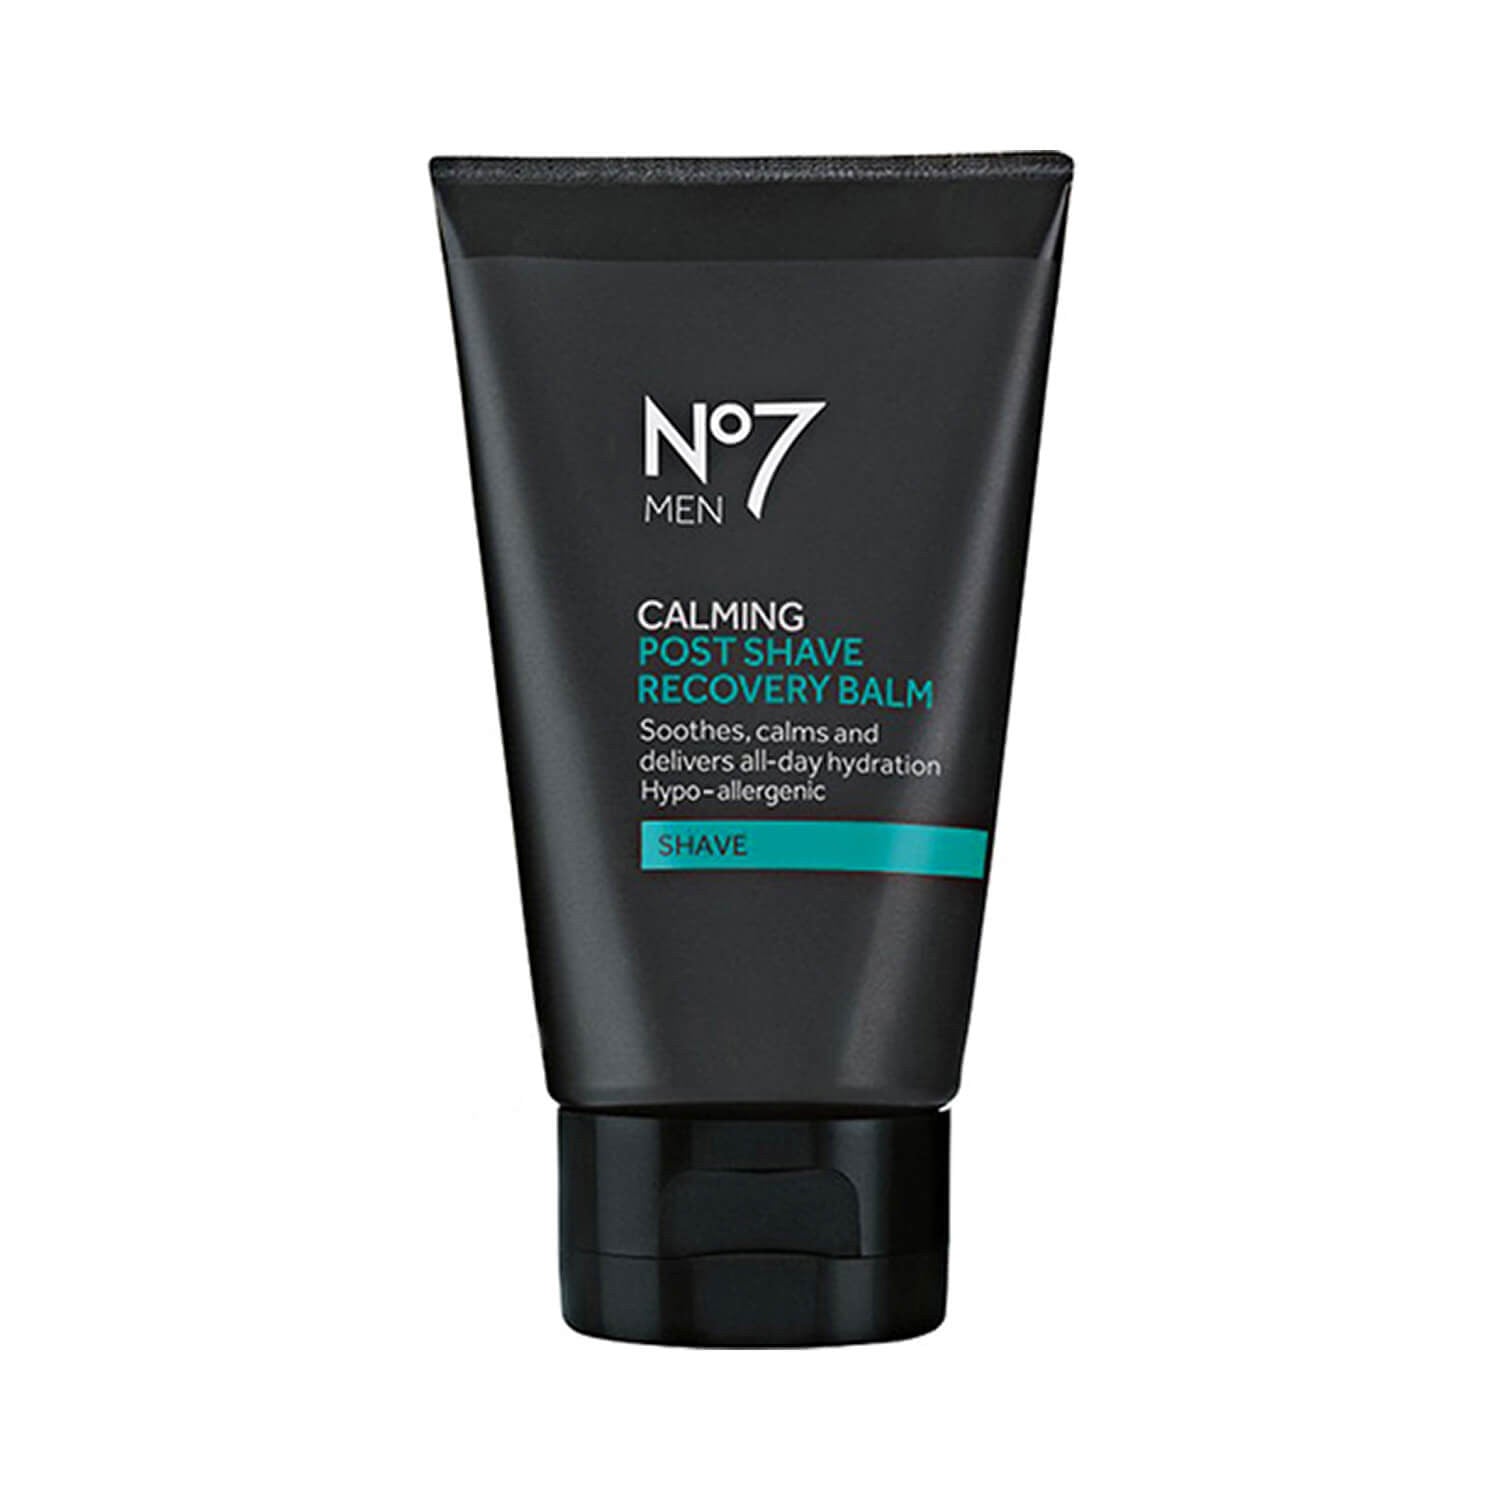 Boots No7 Men Post Shave Recovery Balm 1.69 oz 50 ml